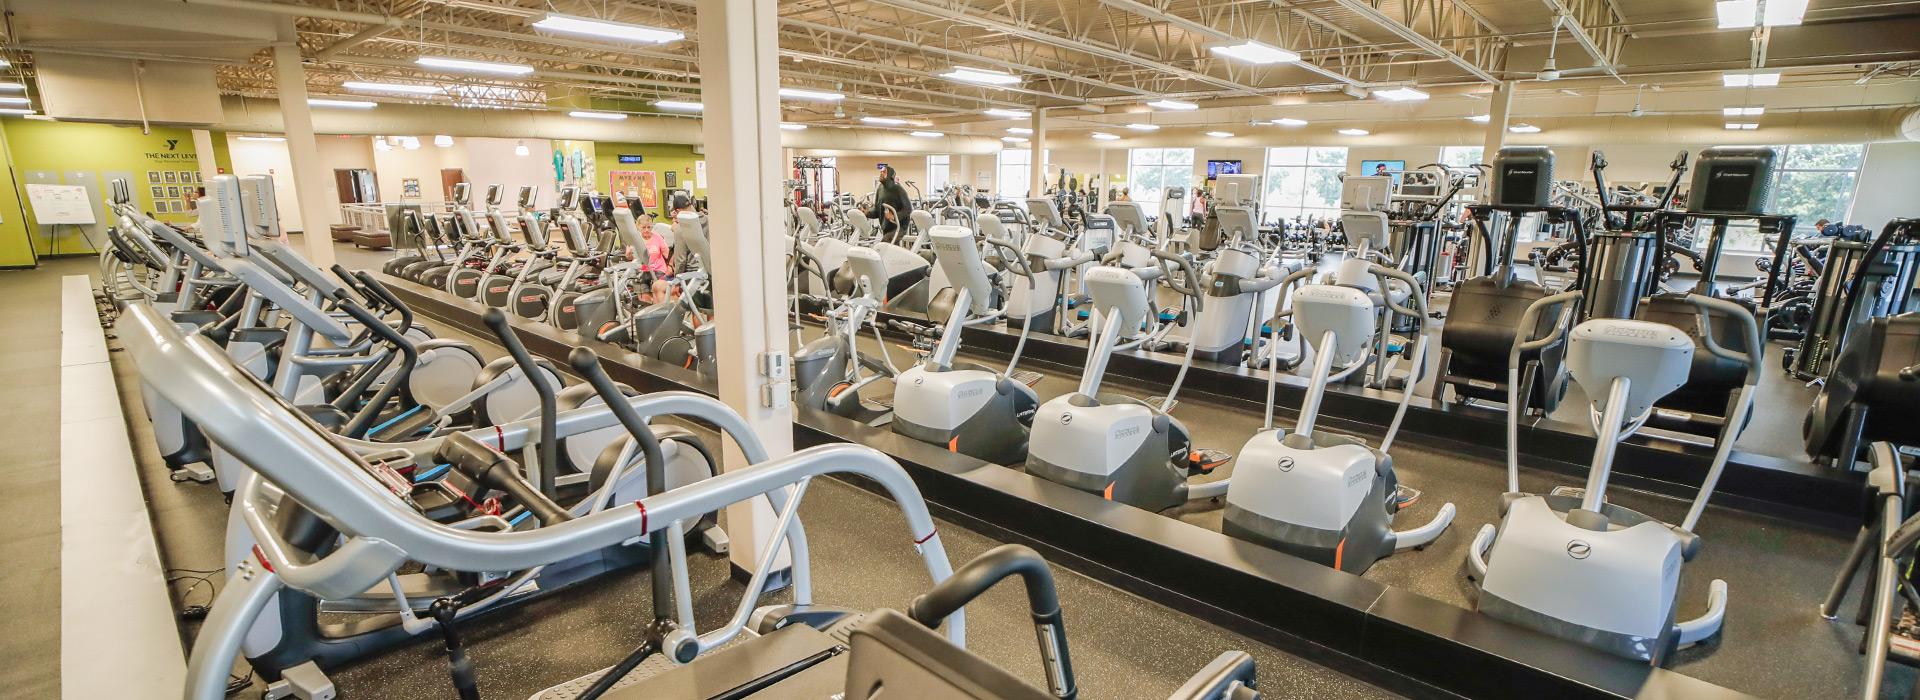 Cardio equipment including treadmills, ellipticals, bikes and steppers in the wellness center at the Princess Anne Family YMCA